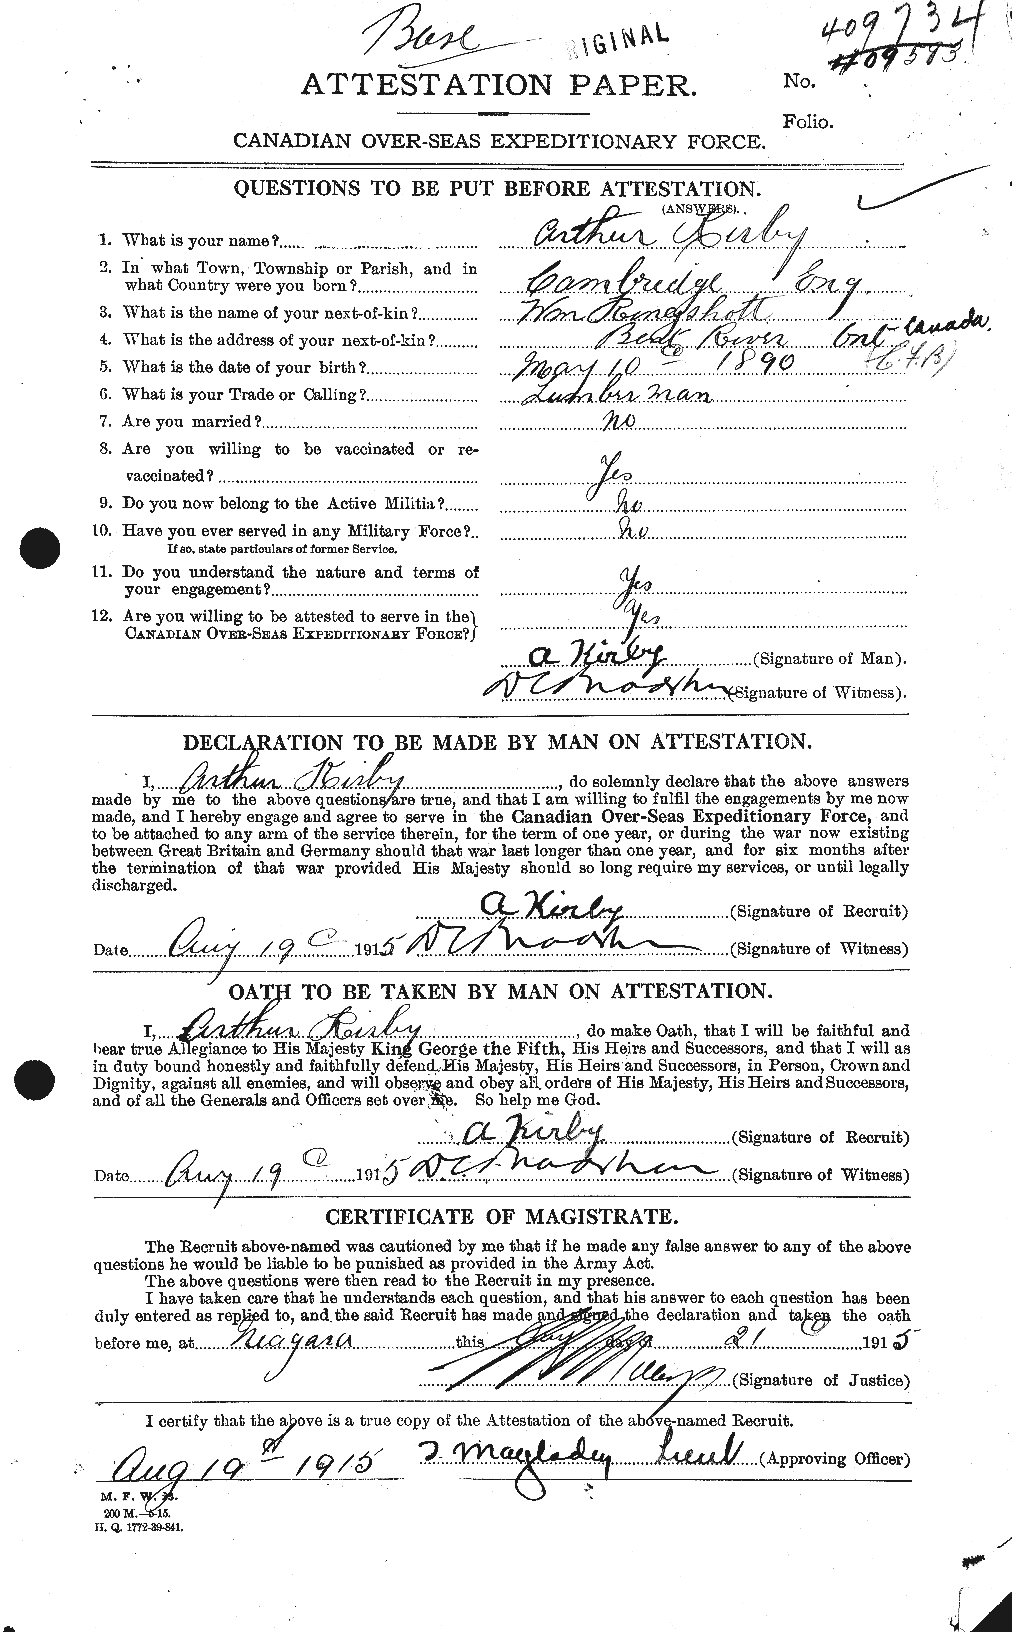 Personnel Records of the First World War - CEF 437152a